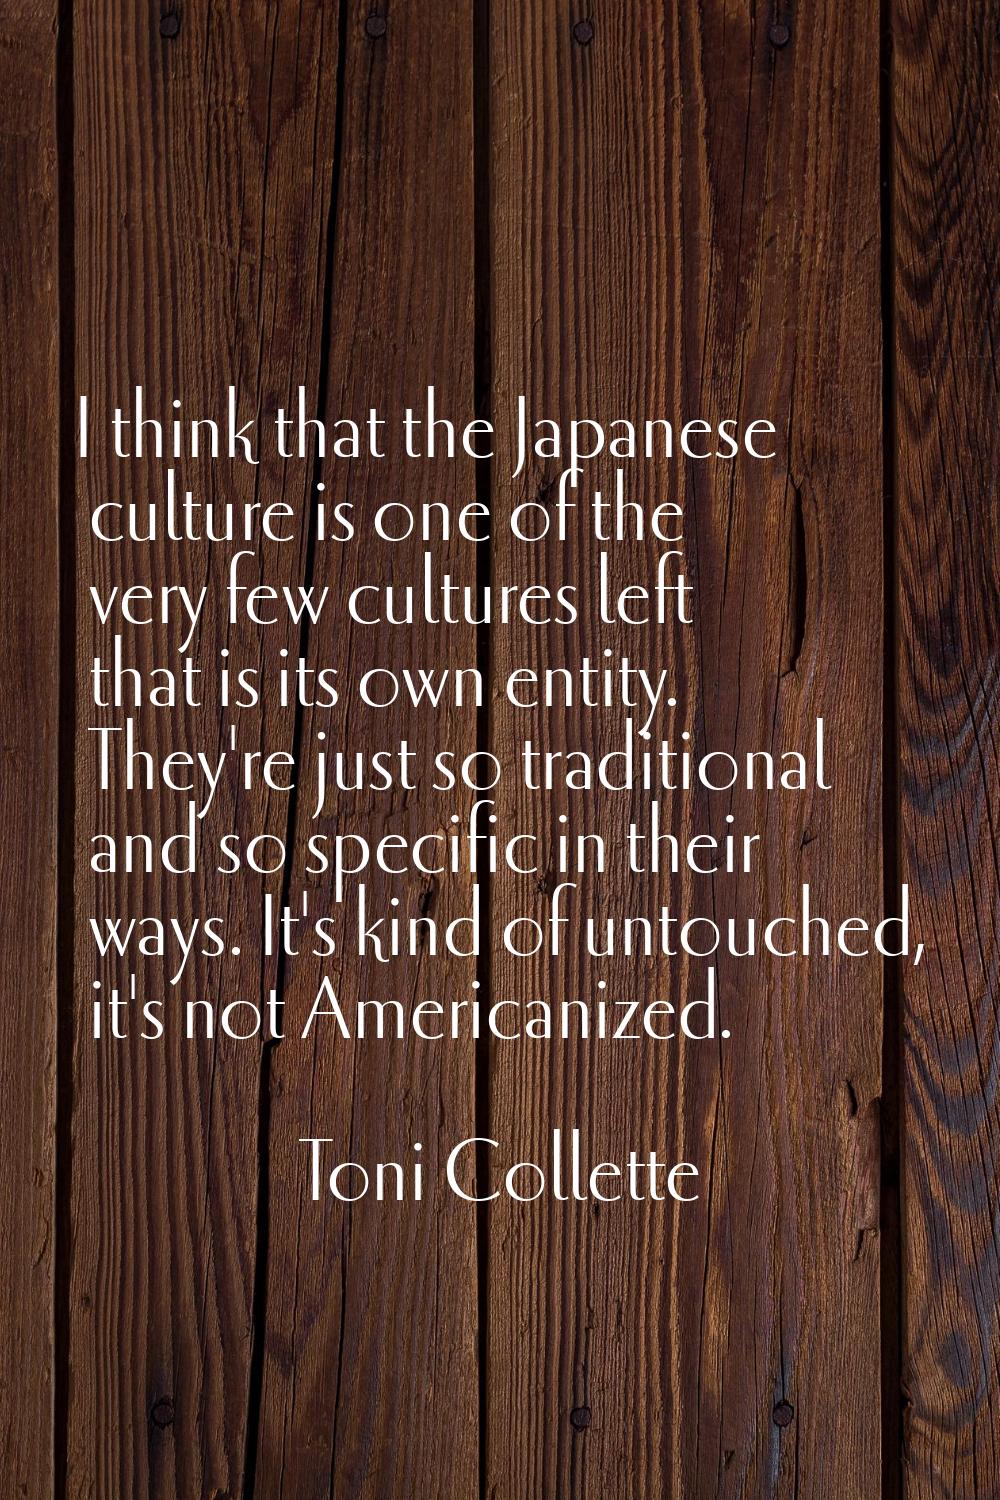 I think that the Japanese culture is one of the very few cultures left that is its own entity. They